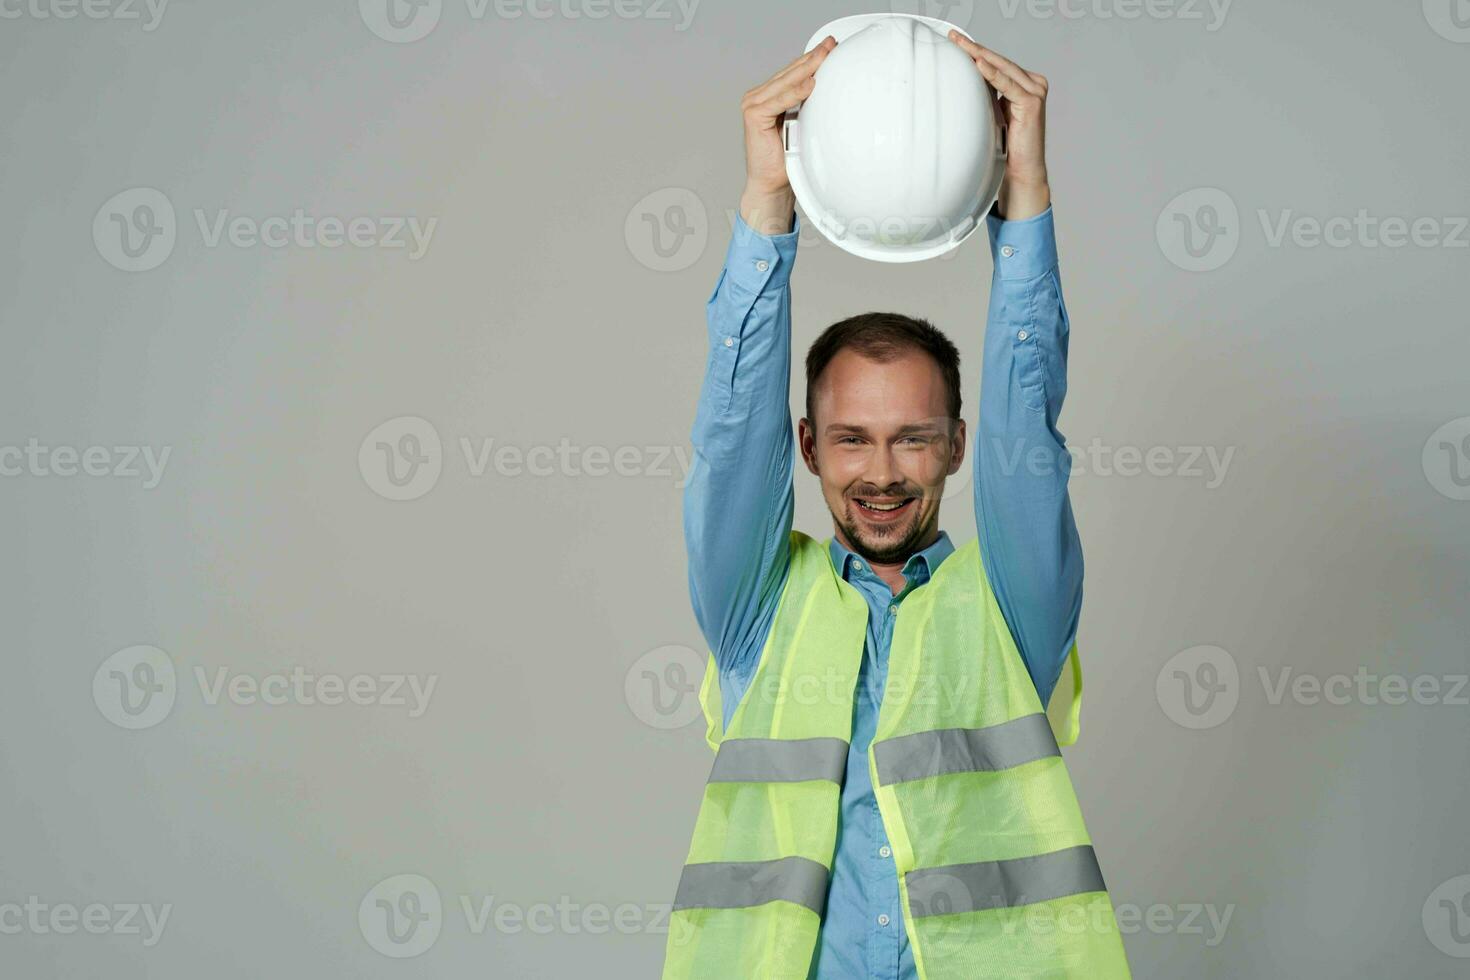 man reflective vest protection Working profession light background photo